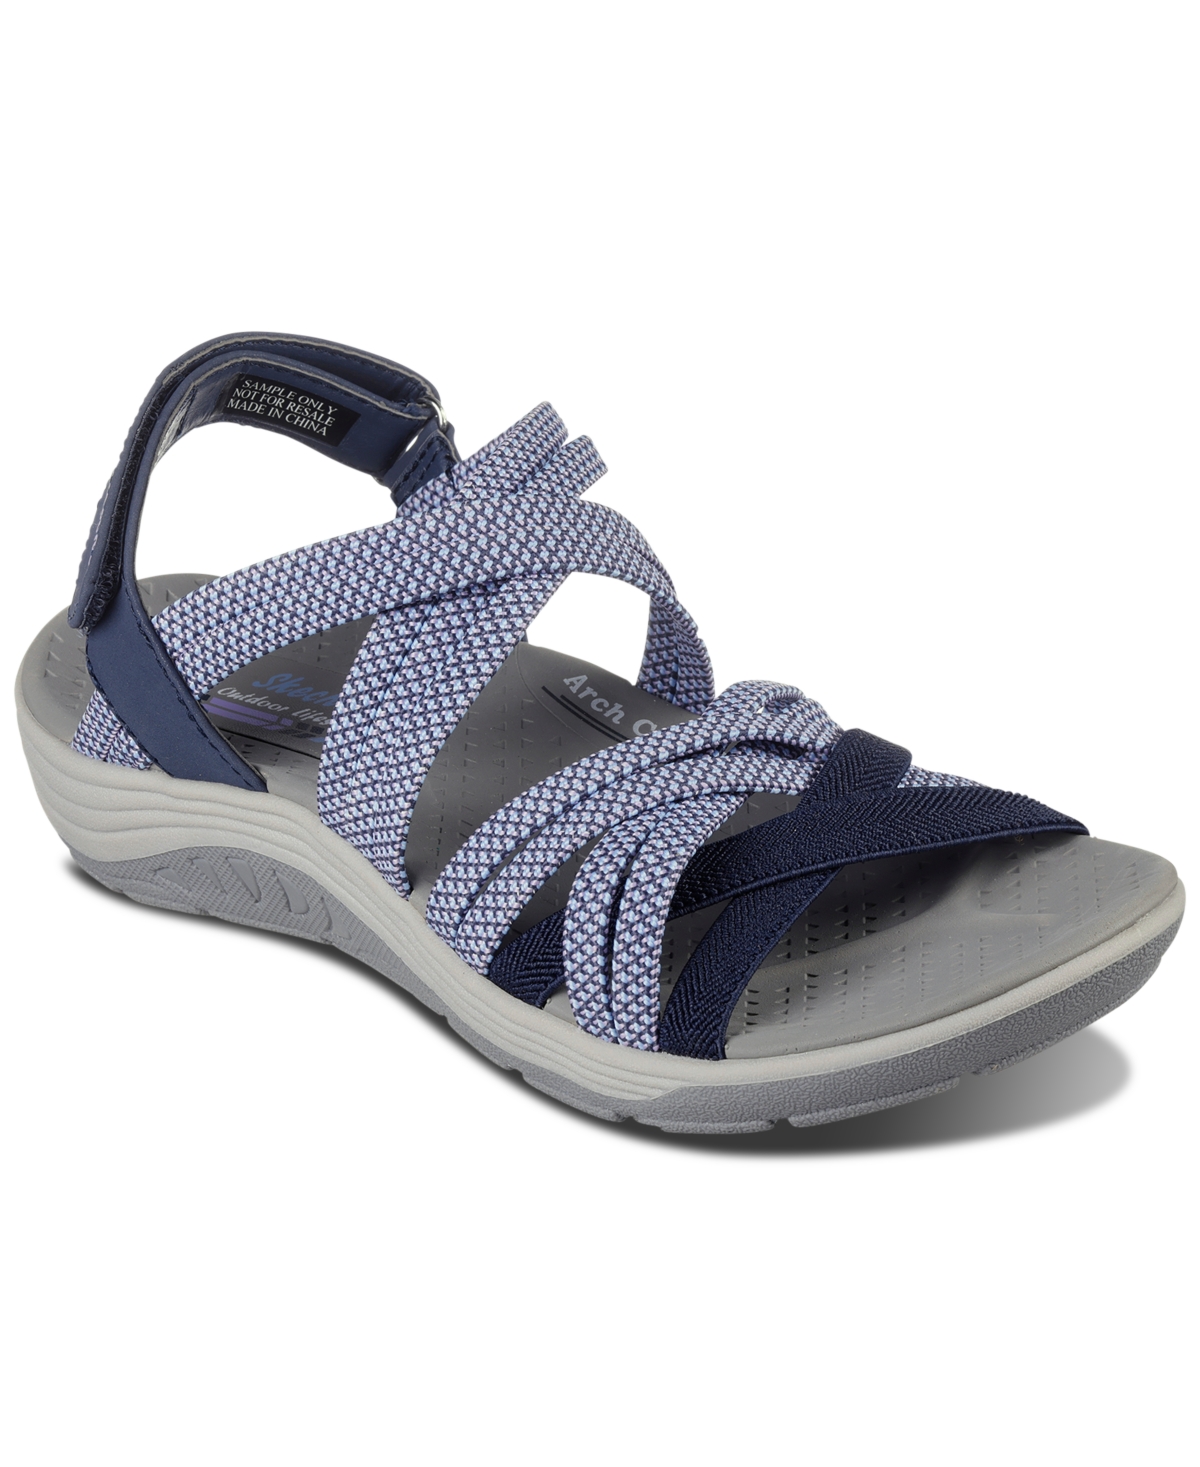 Women's Reggae Cup - Smitten by You Athletic Sandals from Finish Line - Navy Blue